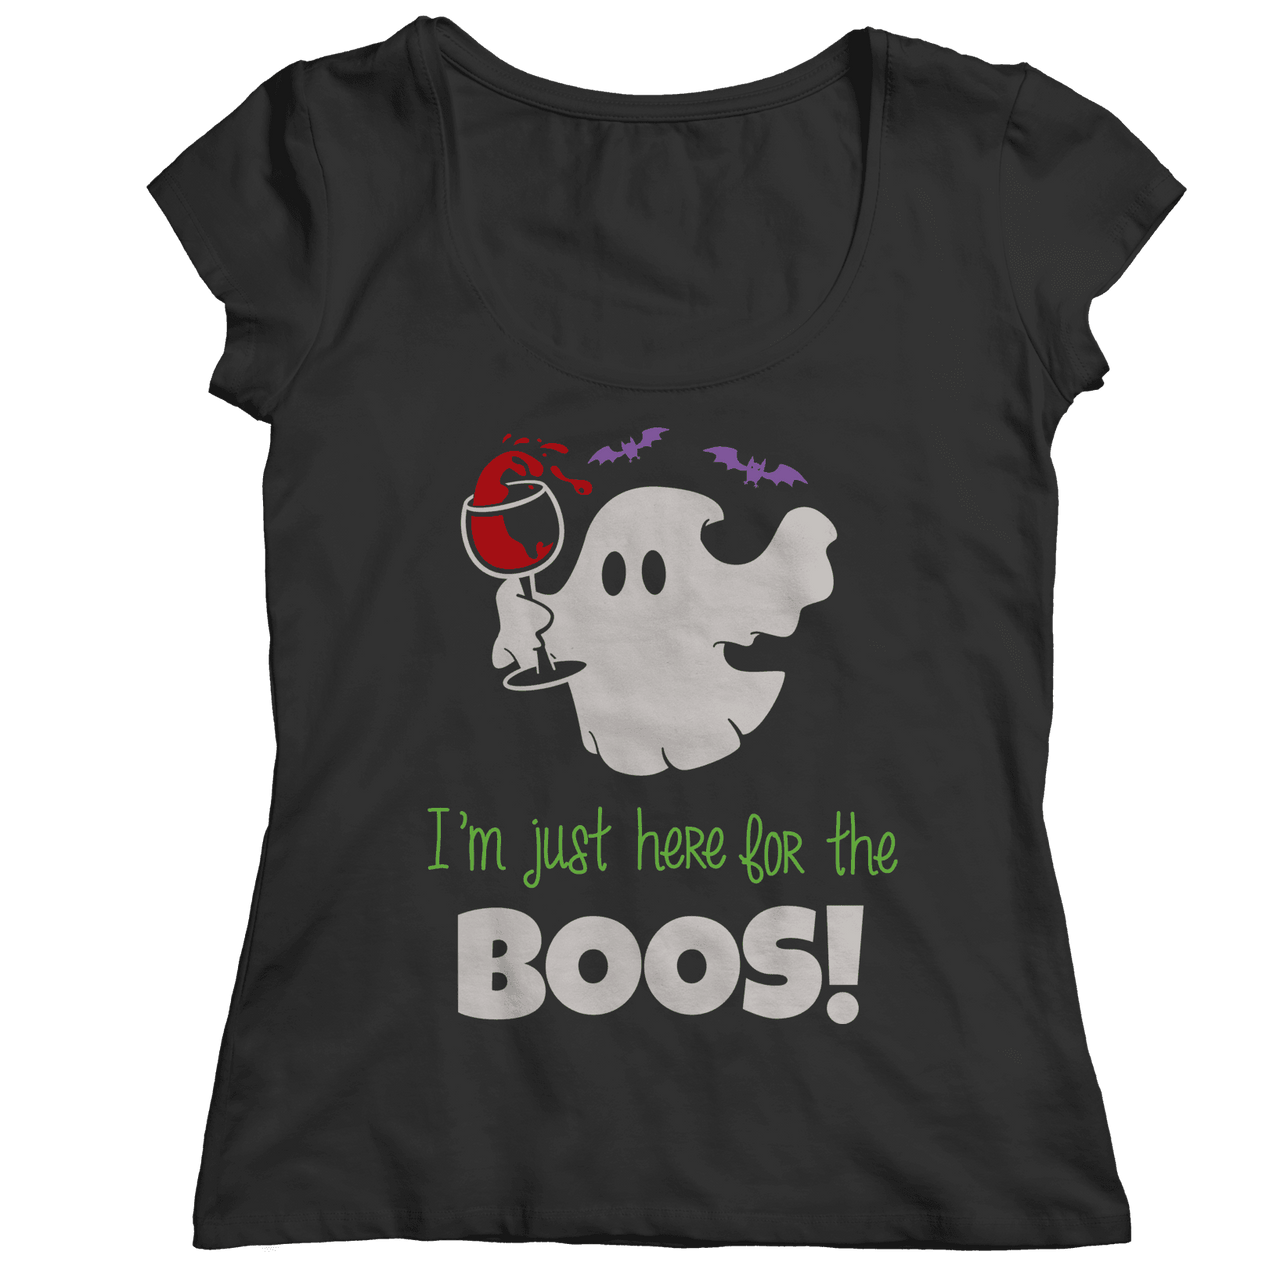 Limited Edition - I'm Just Here For The Boos!